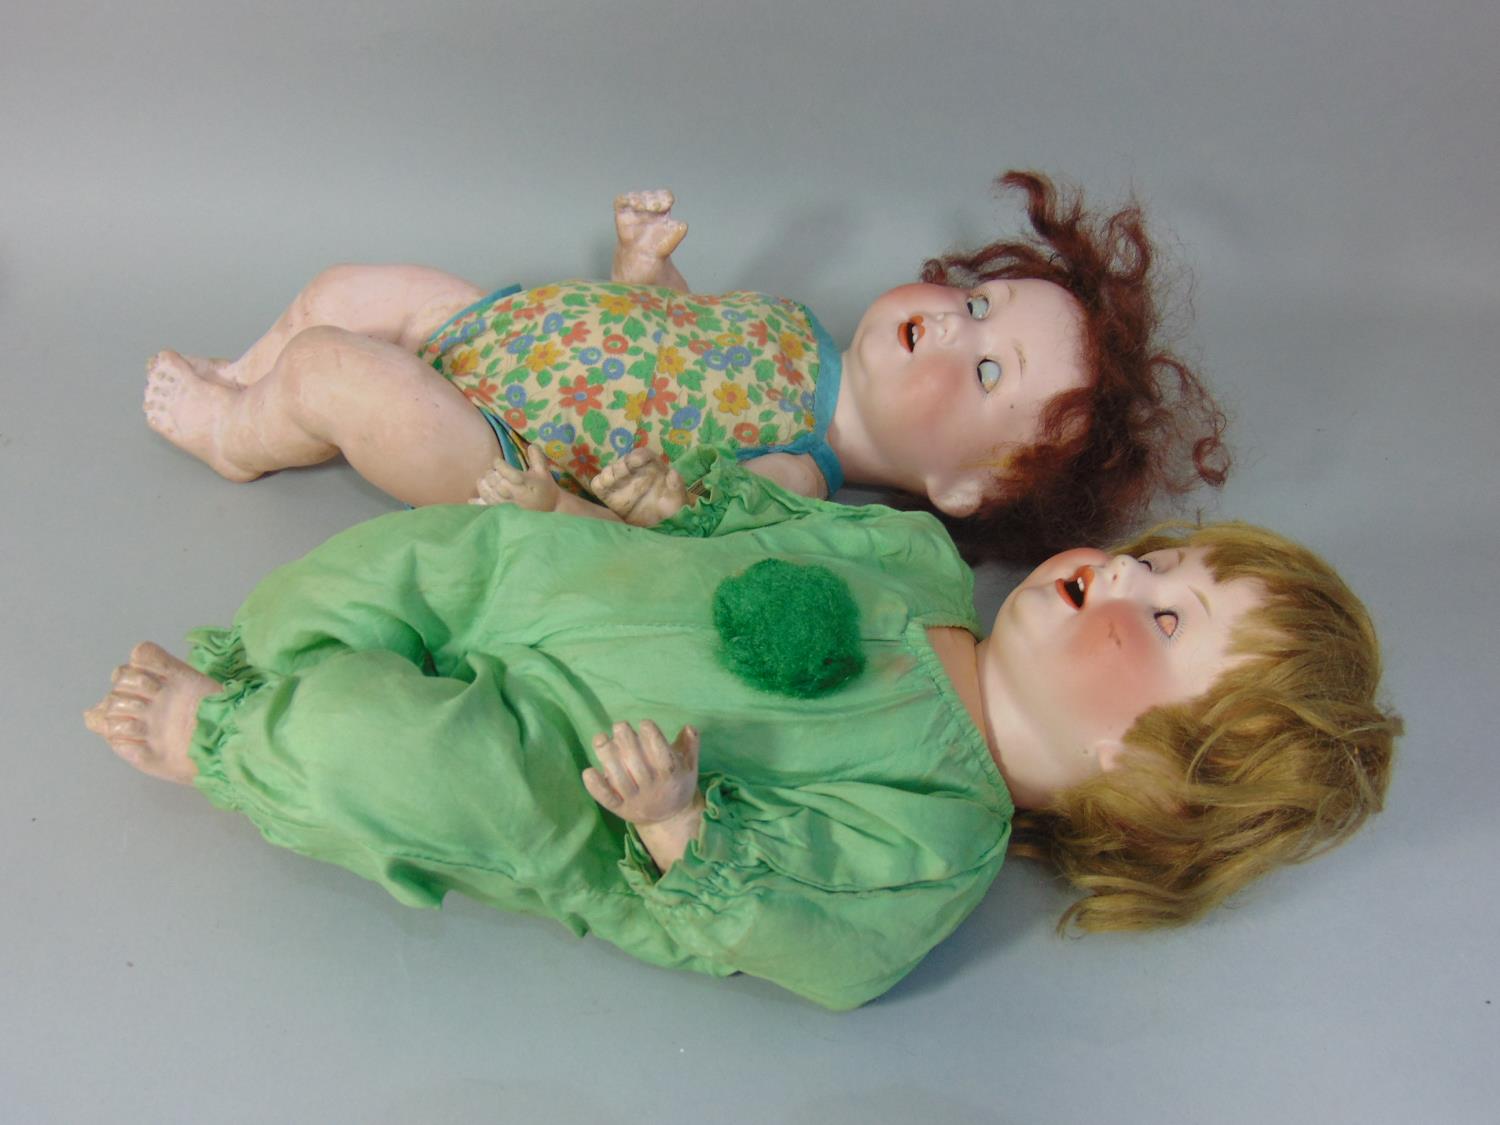 A Franz Schmidt bisque head character baby doll, with closing blue eyes and open mouth with two - Image 4 of 6